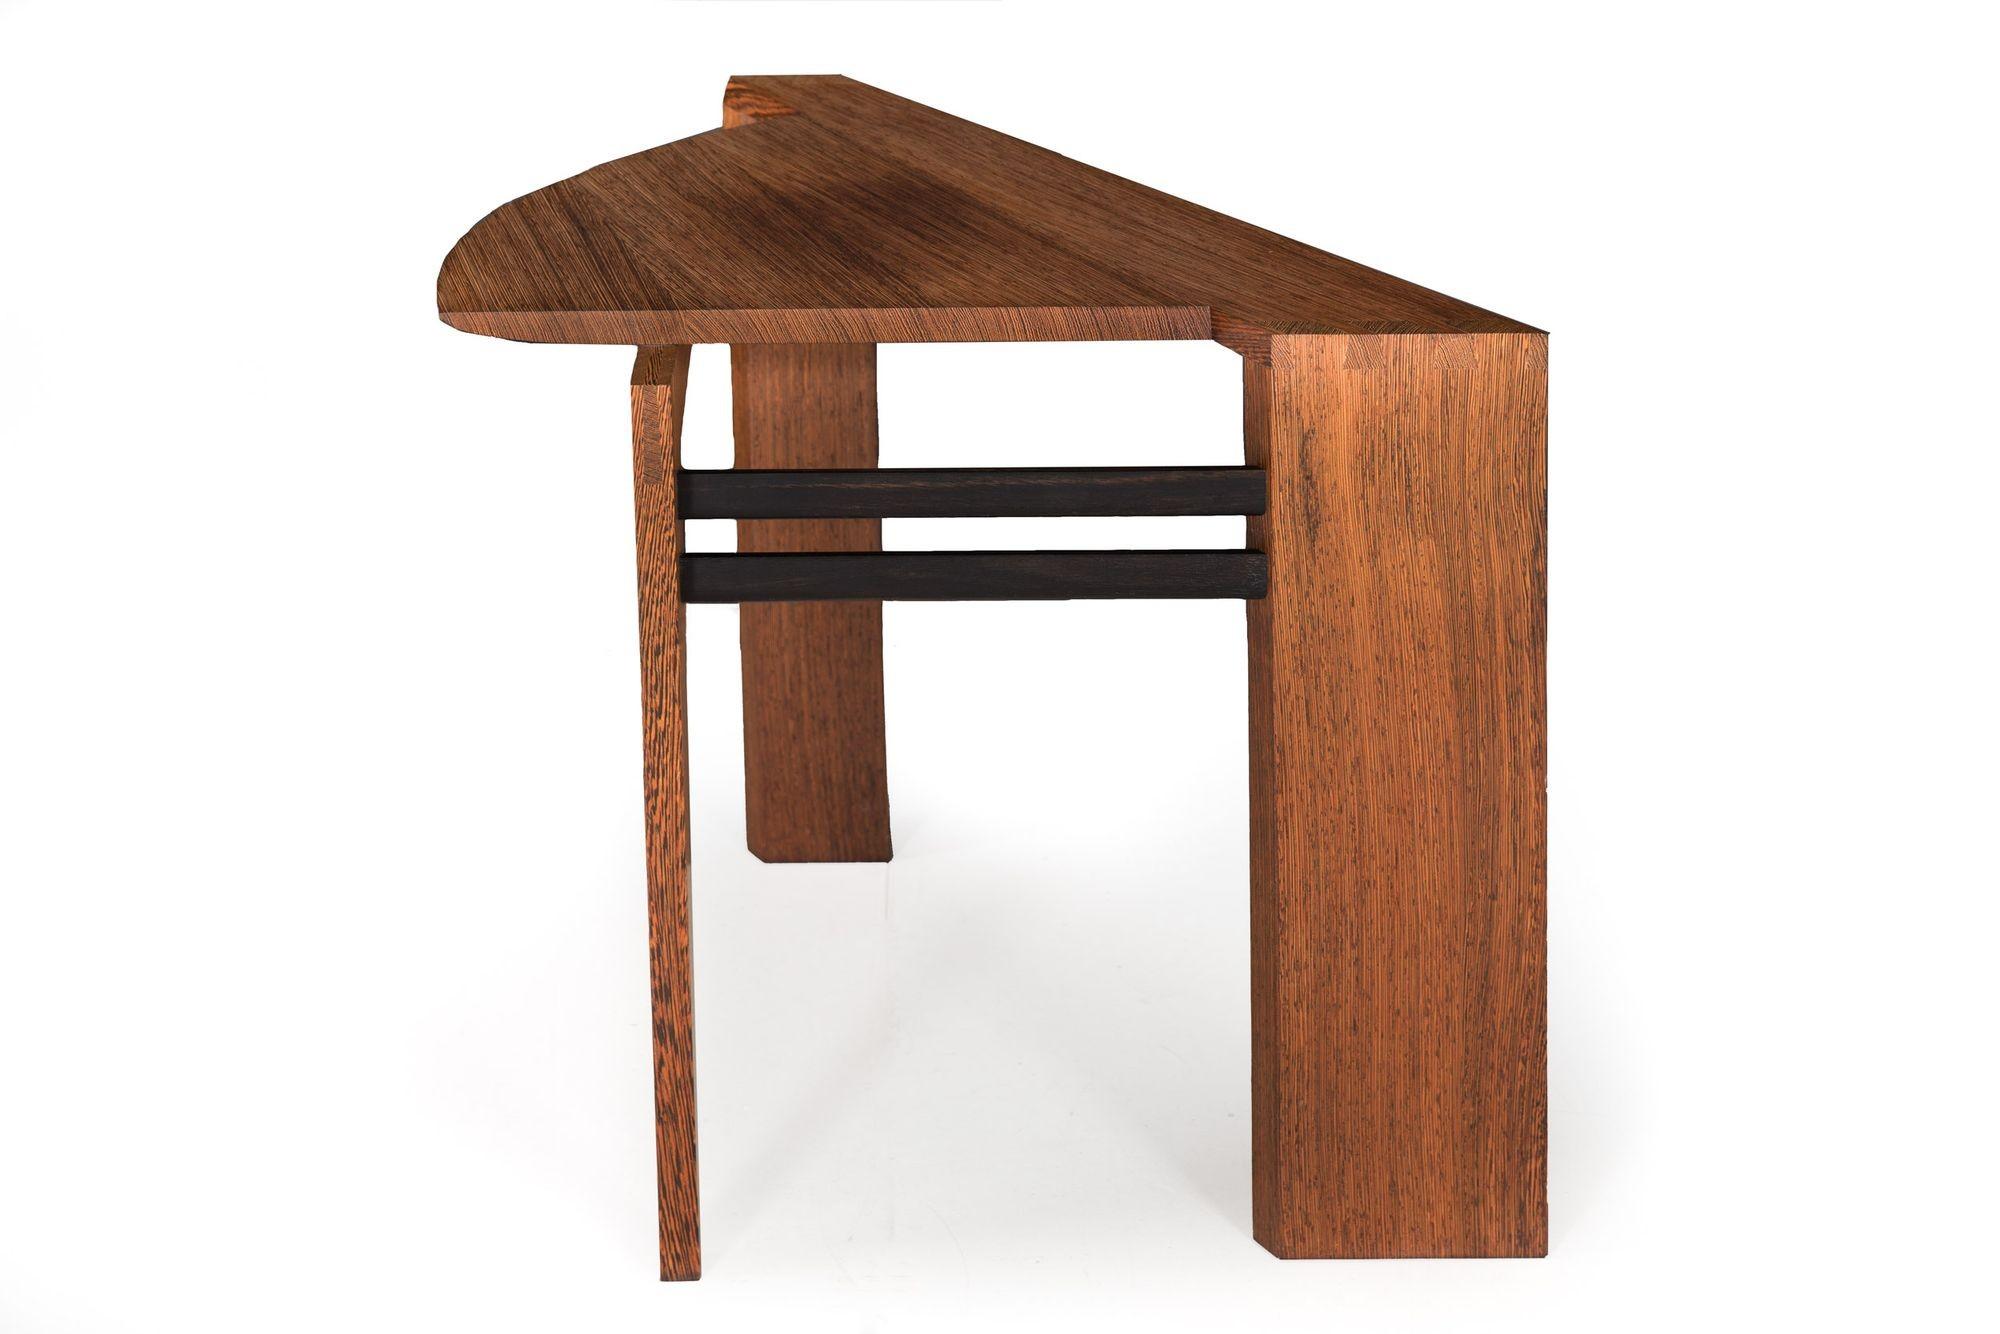 American Post-Modern Ebony Hardwood Accent Table w/ Dovetailed Corners, circa 1987 For Sale